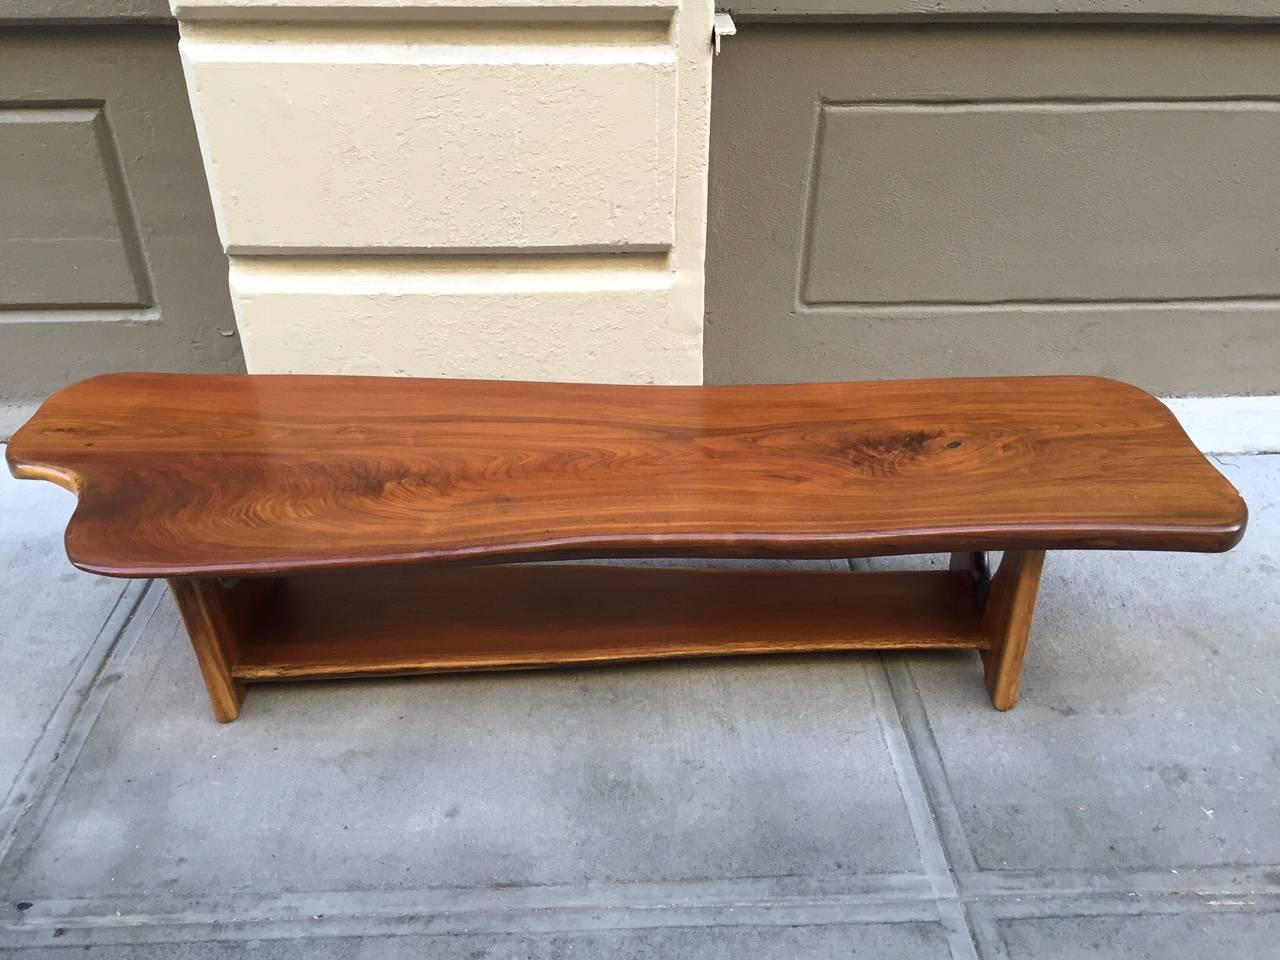 Organic free-form edge slab bench or coffee table. Solid wood. Style Phillip Lloyd Powell, bench